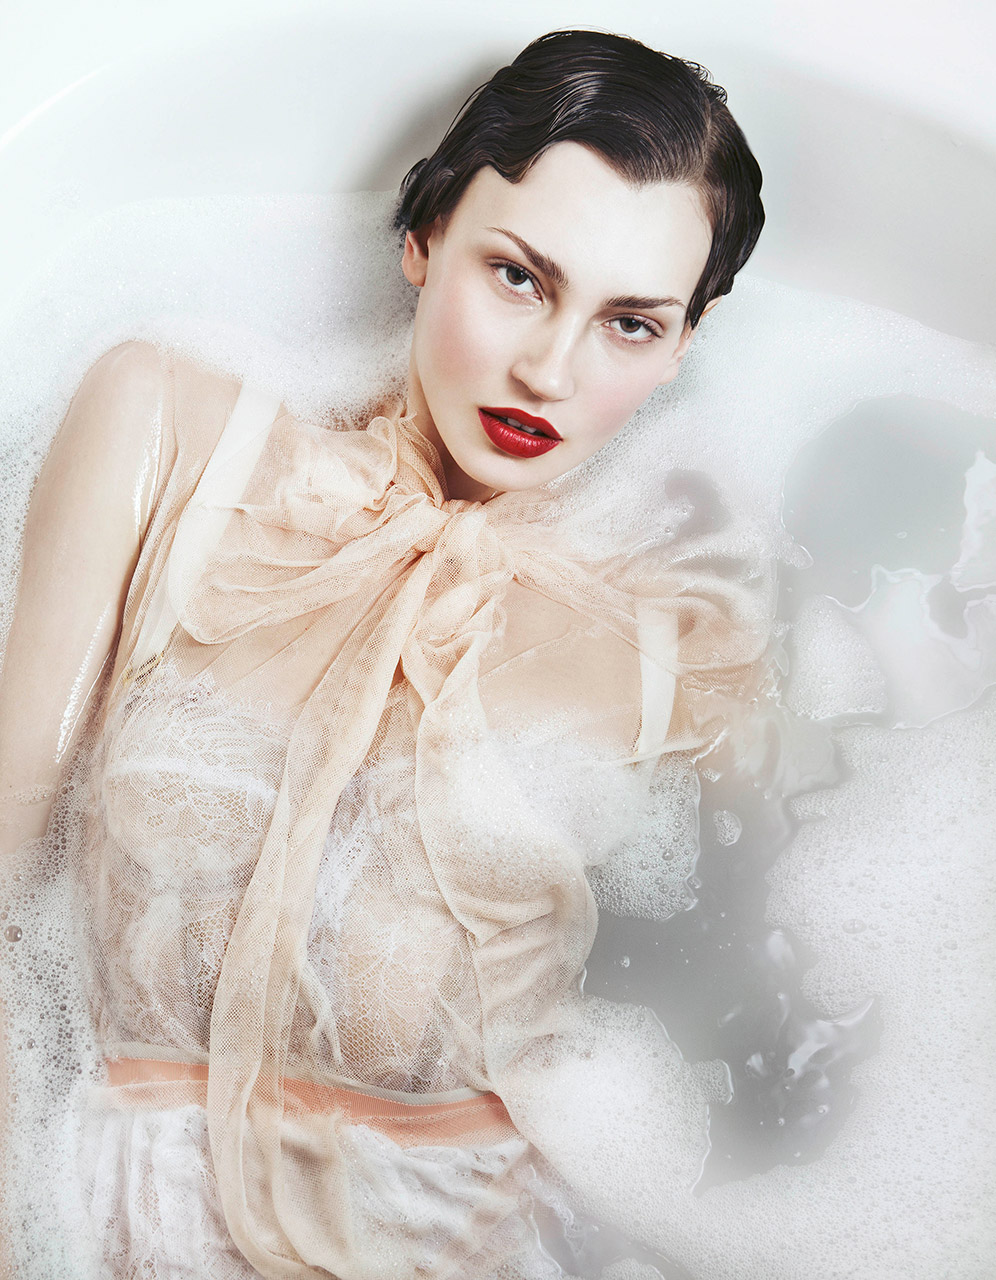 Woman in lingerie half submersed in a milky bath